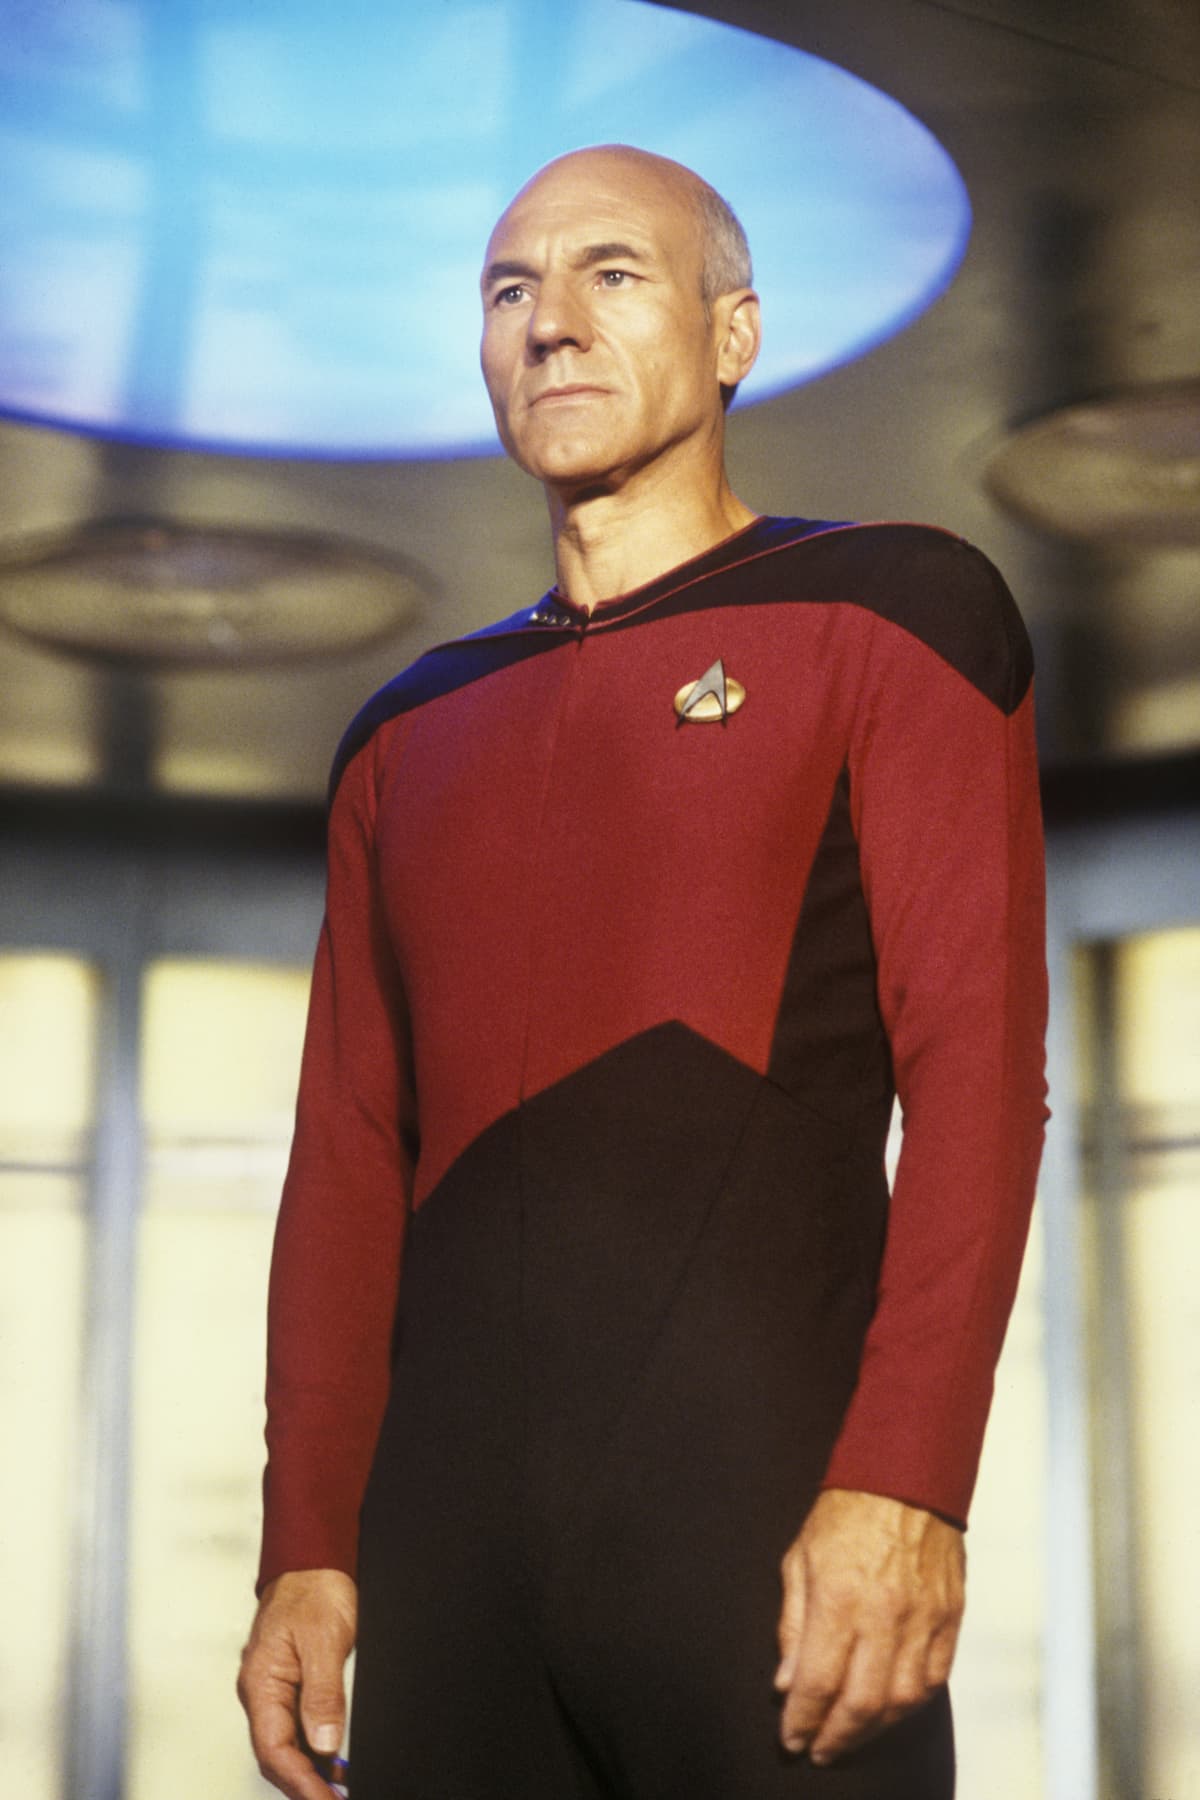 Patrick Stewart, star of TV's "Star Trek: The Next Generation," prepares to "engage" during filming at Paramount Studios in Hollywood, California in 1987.